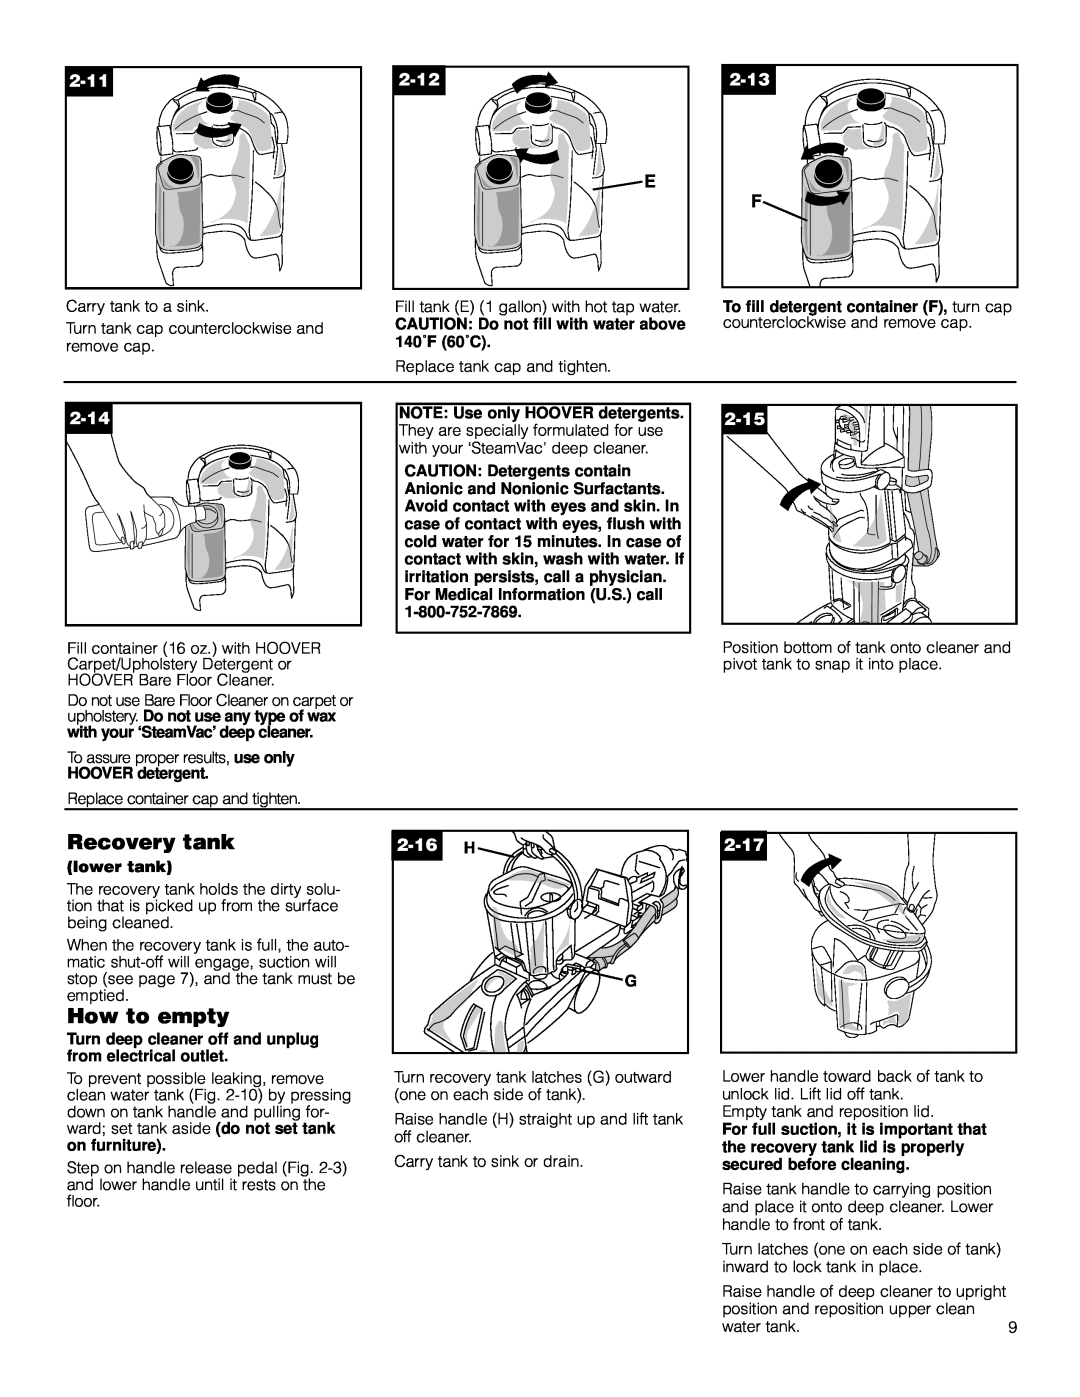 Hoover Deep Cleaner Steam Vacuum manual Recovery tank, How to empty, 2-11, 2-12, 2-13, 2-14, 2-15, 2-16, 2-17 